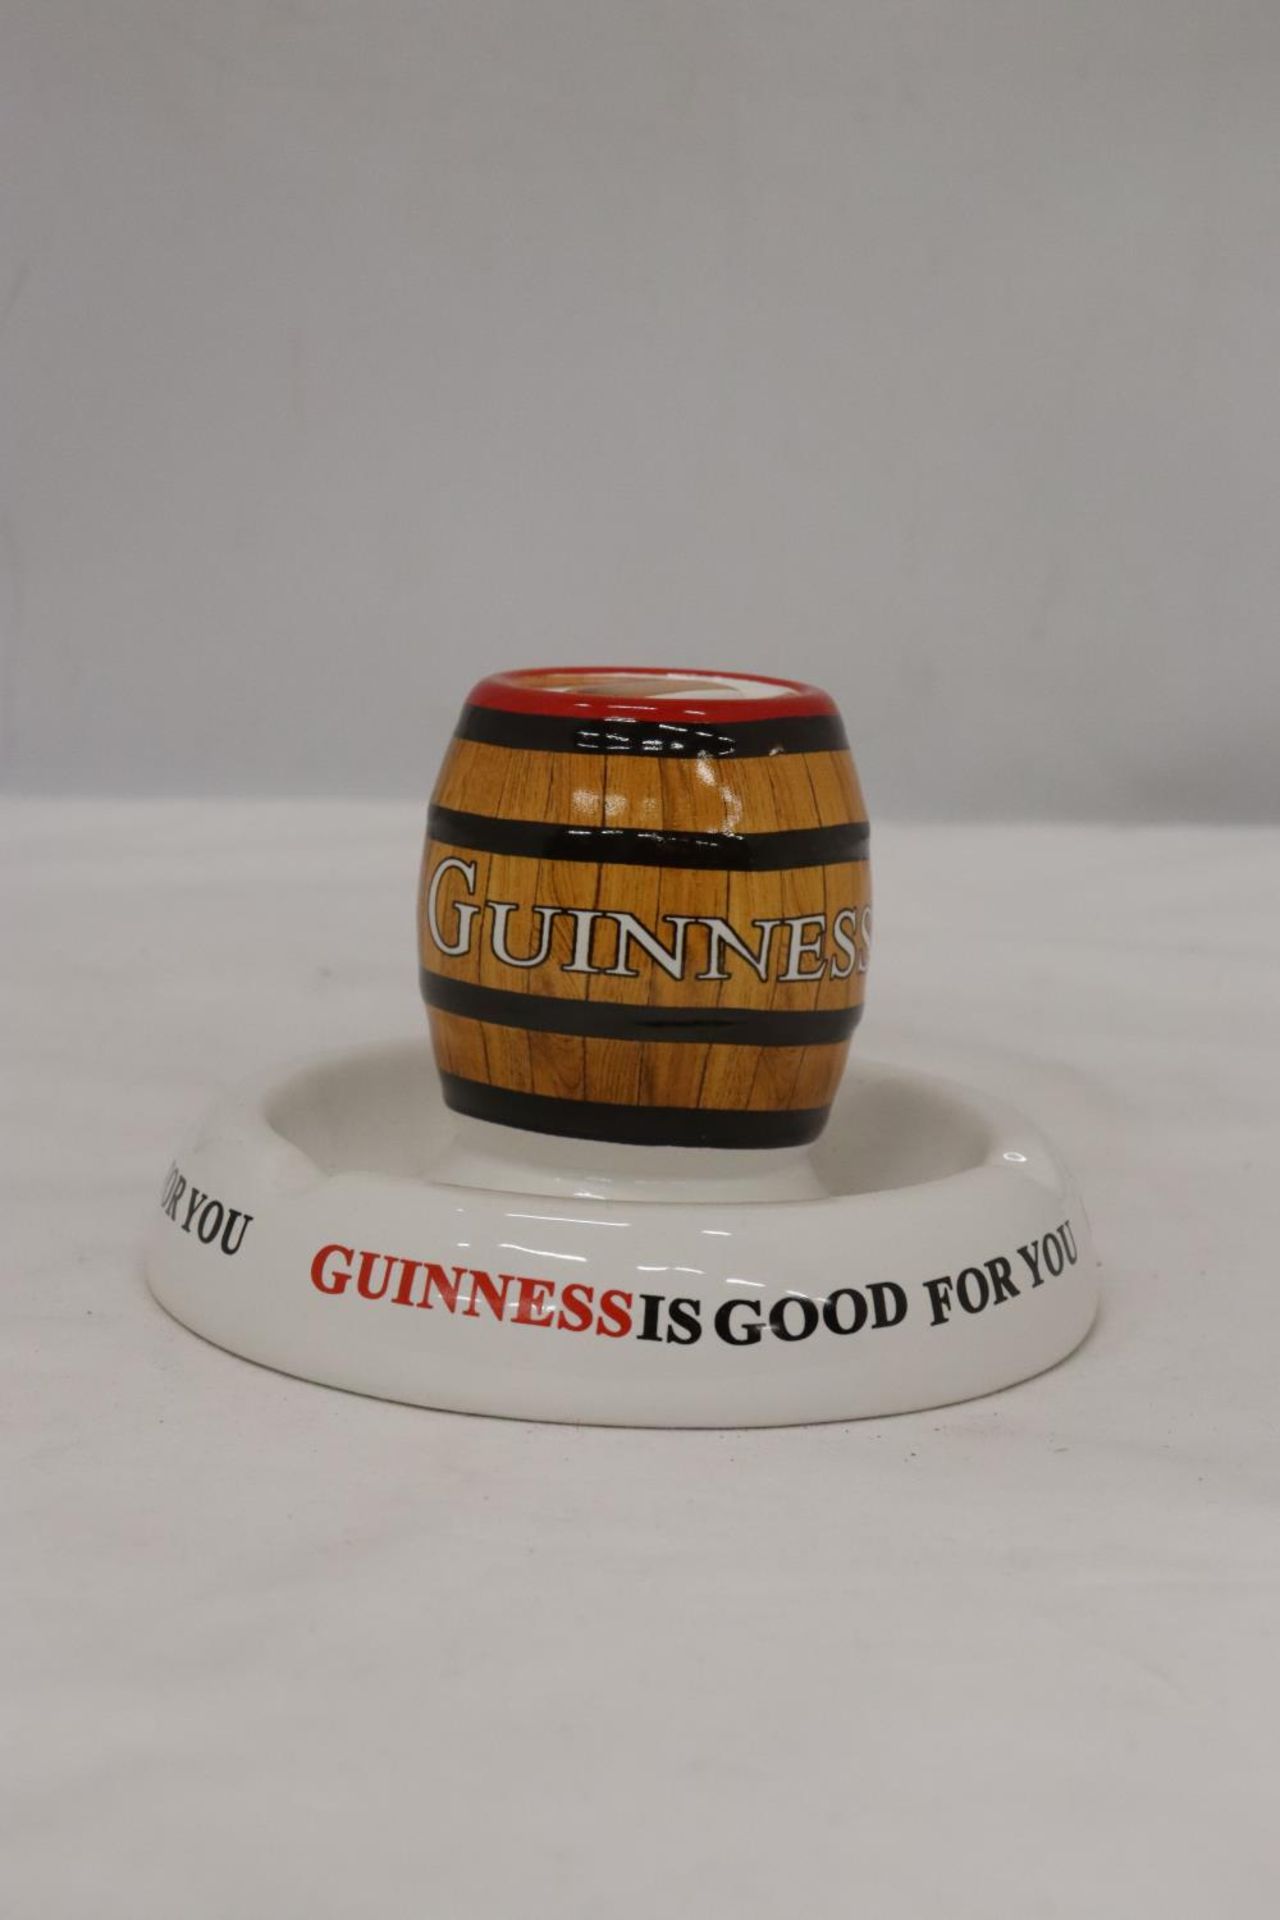 A MINTONS GUINESS ADVERTISING ASHTRAY - Image 2 of 4